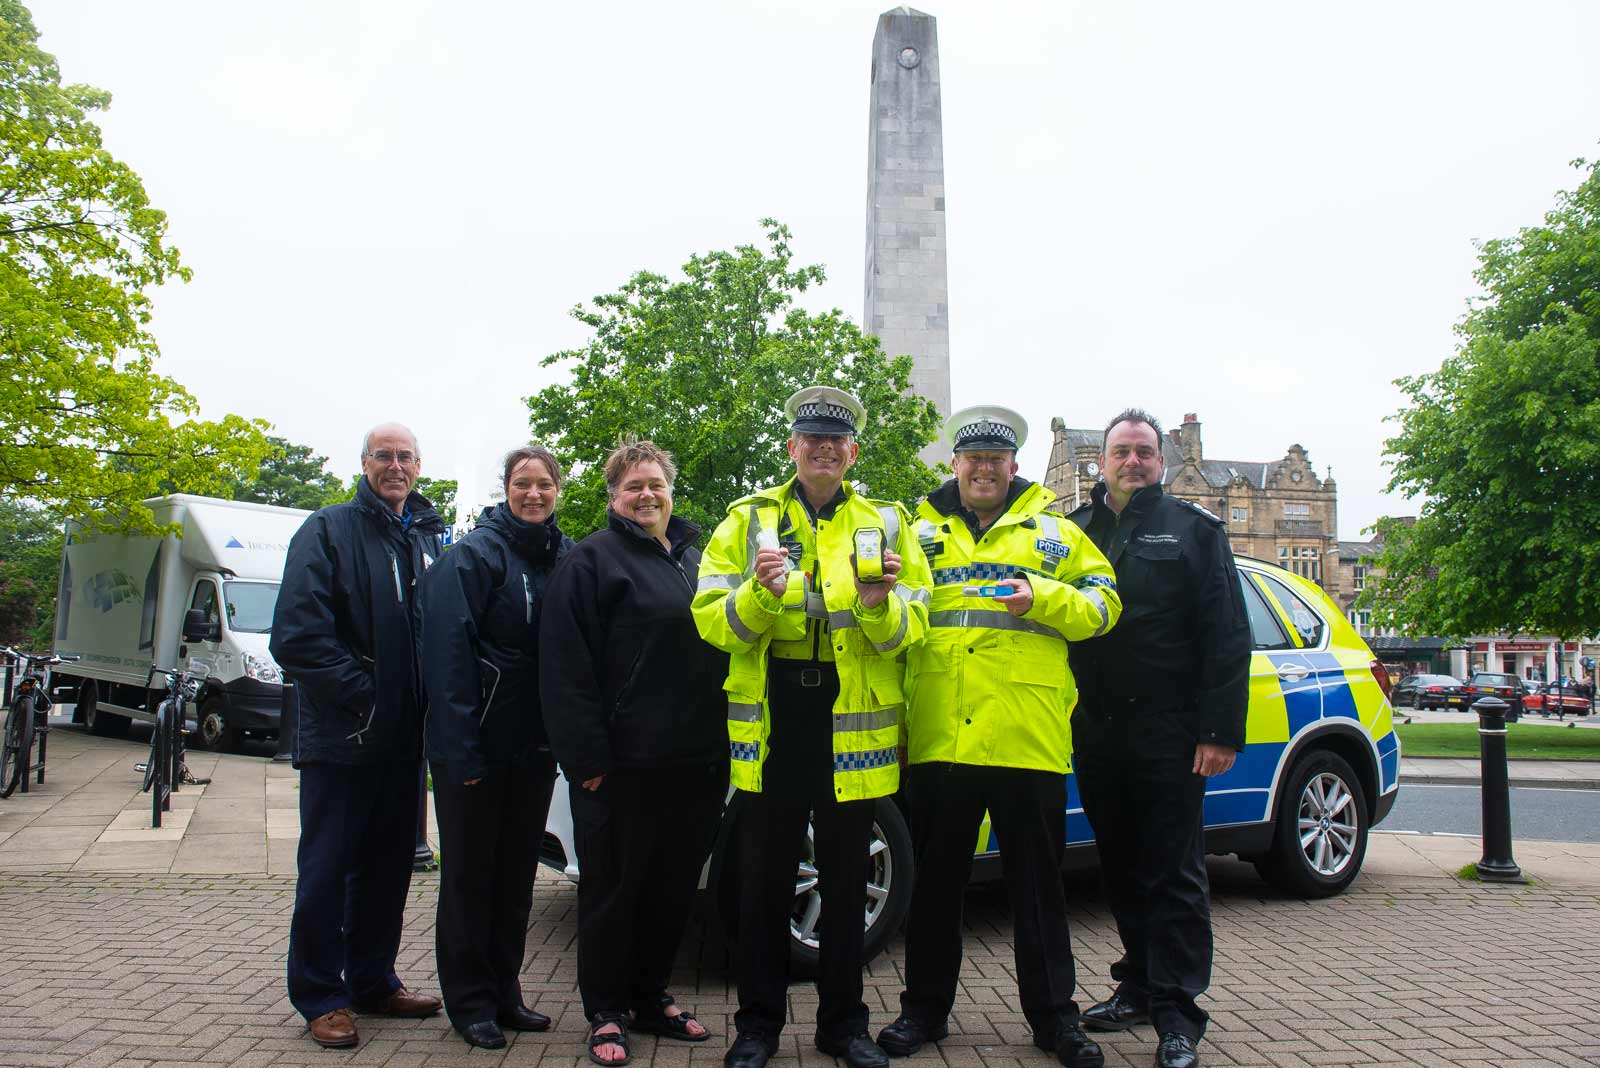 Drink - drug drive launch event in Harrogate